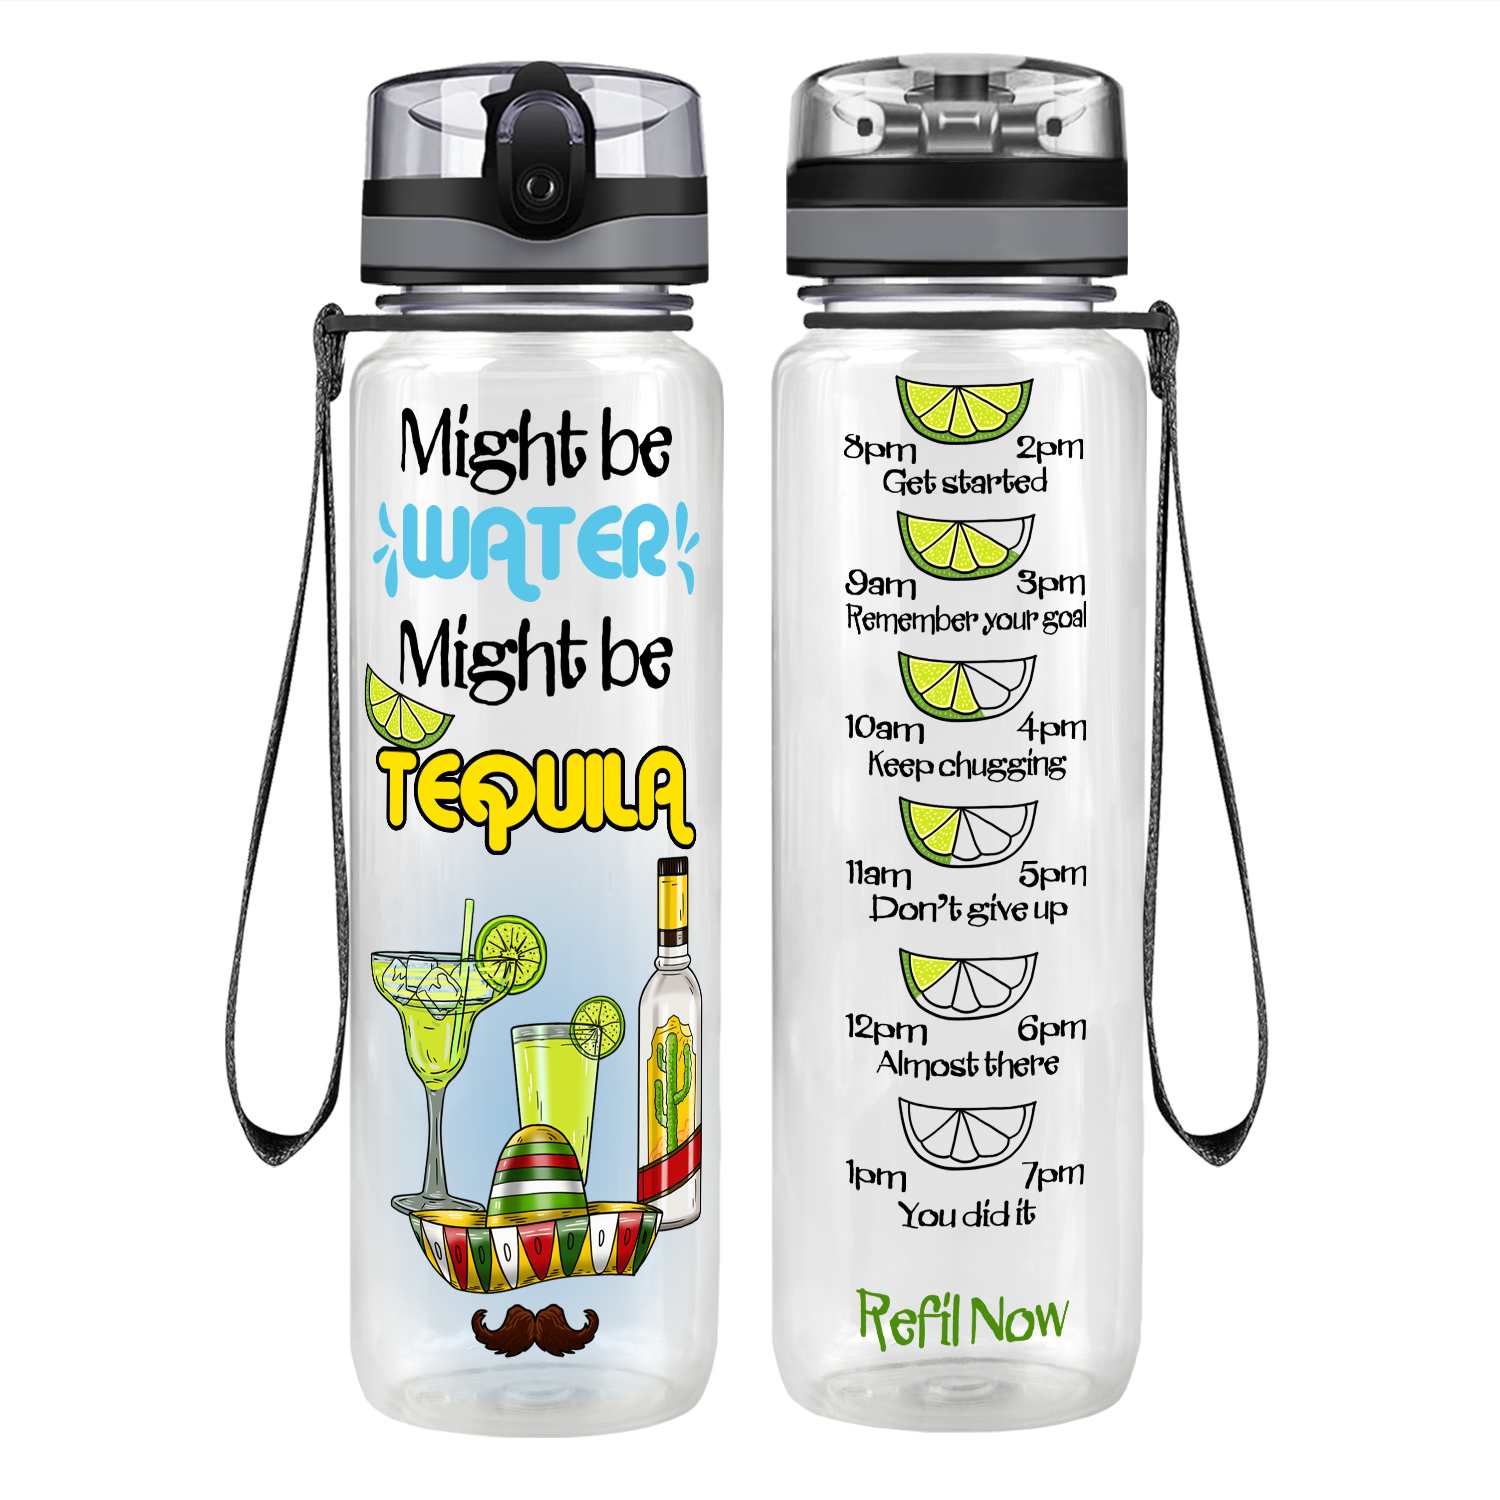 Might Be Water Might be Tequila Motivational Tracking Water Bottle